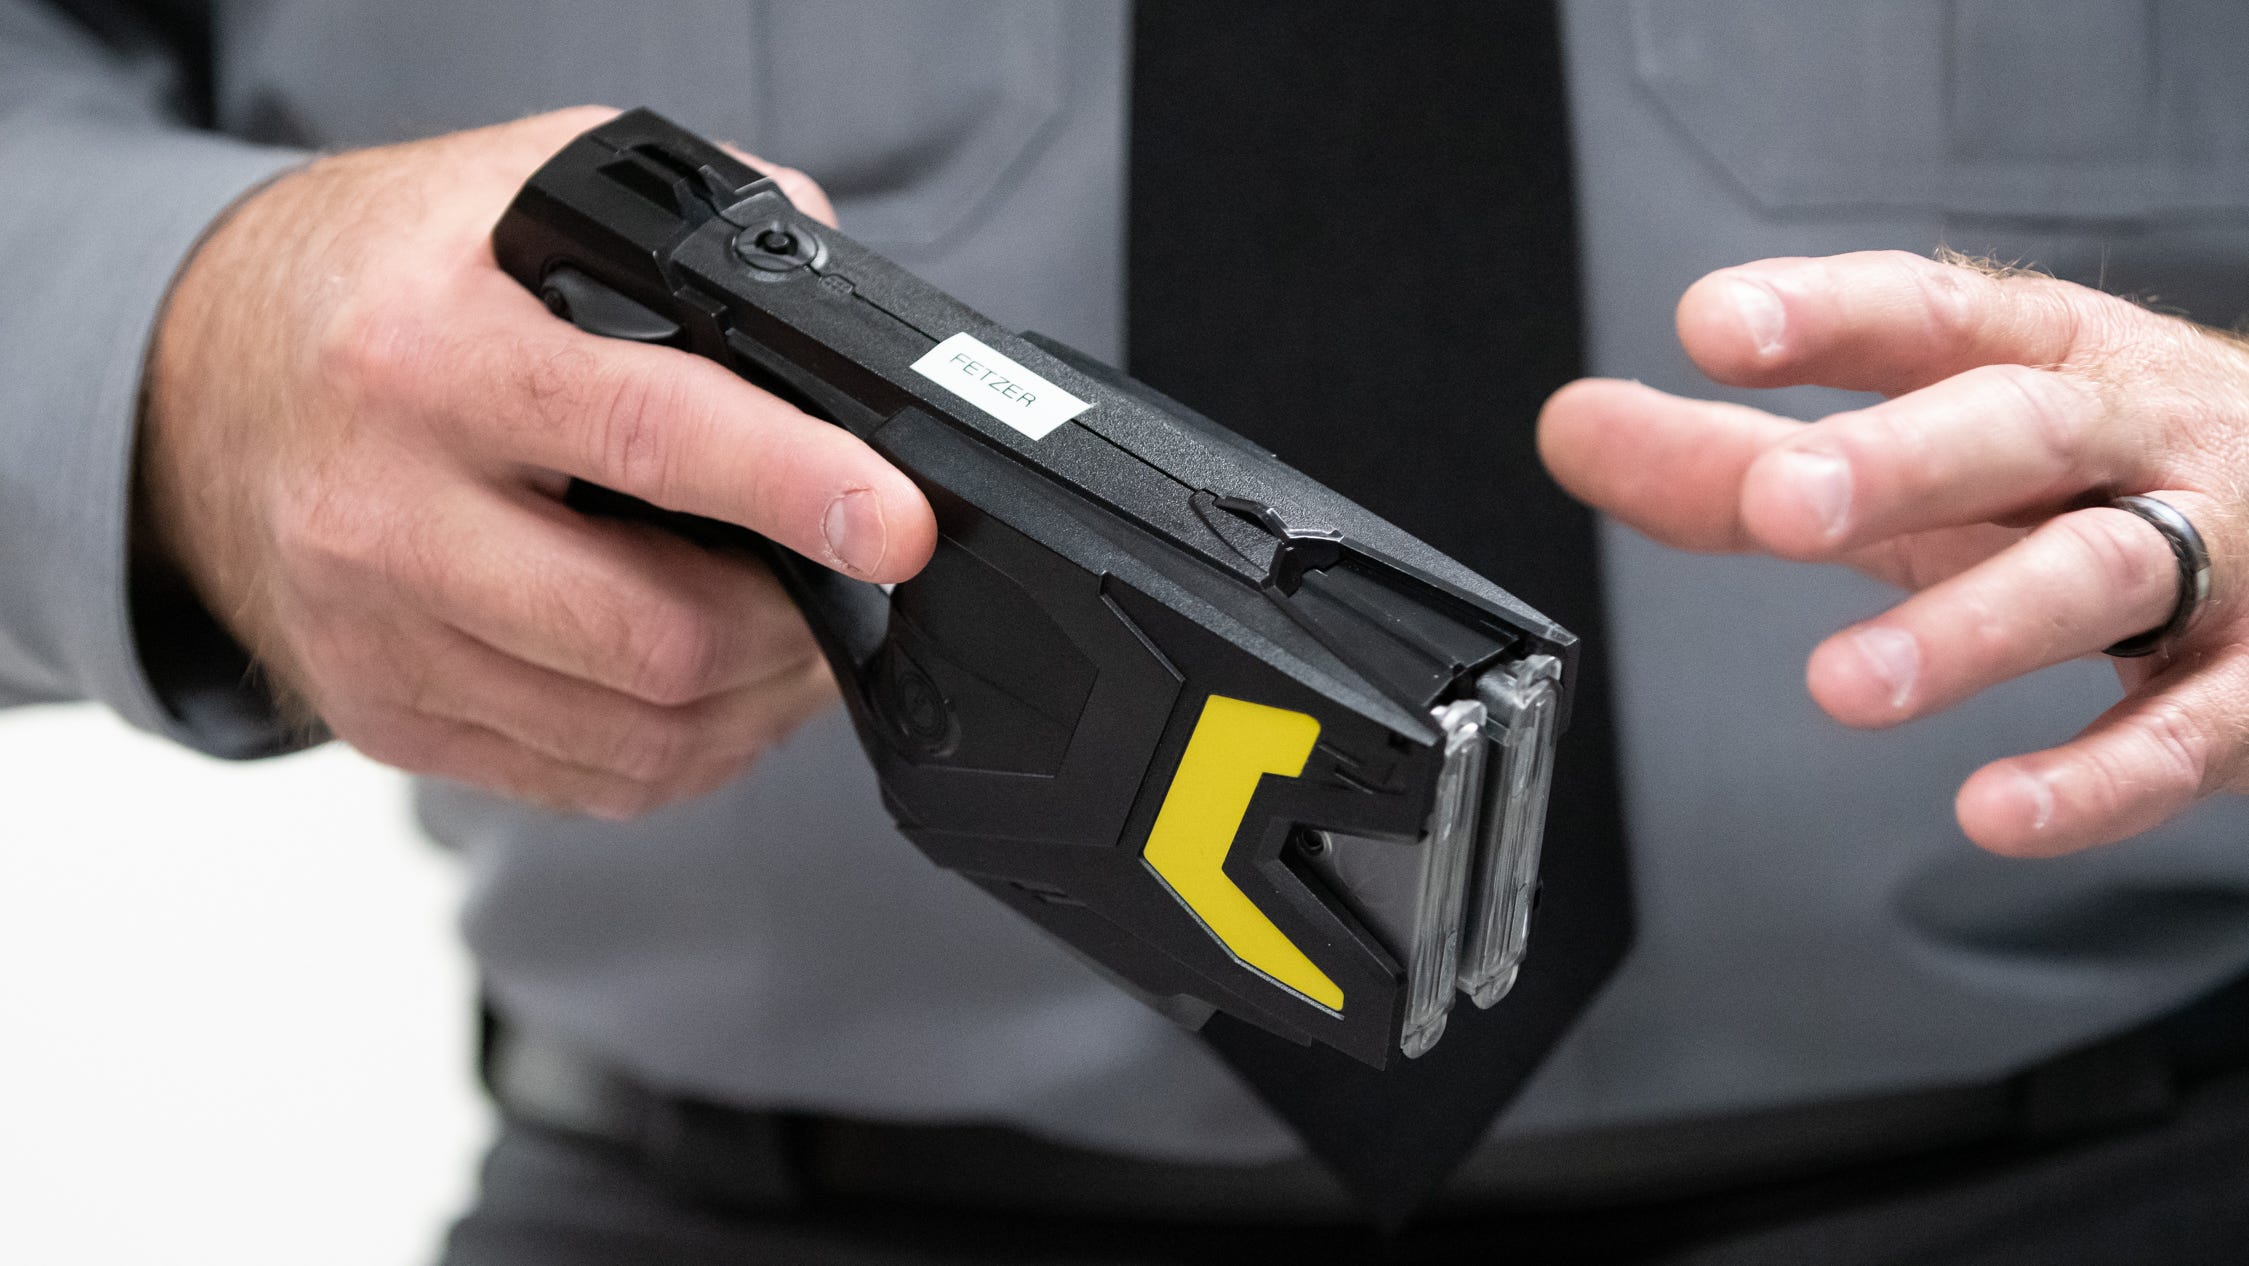 Police Use Of Tasers Ends In Hundreds Of Deaths Like Daunte Wright